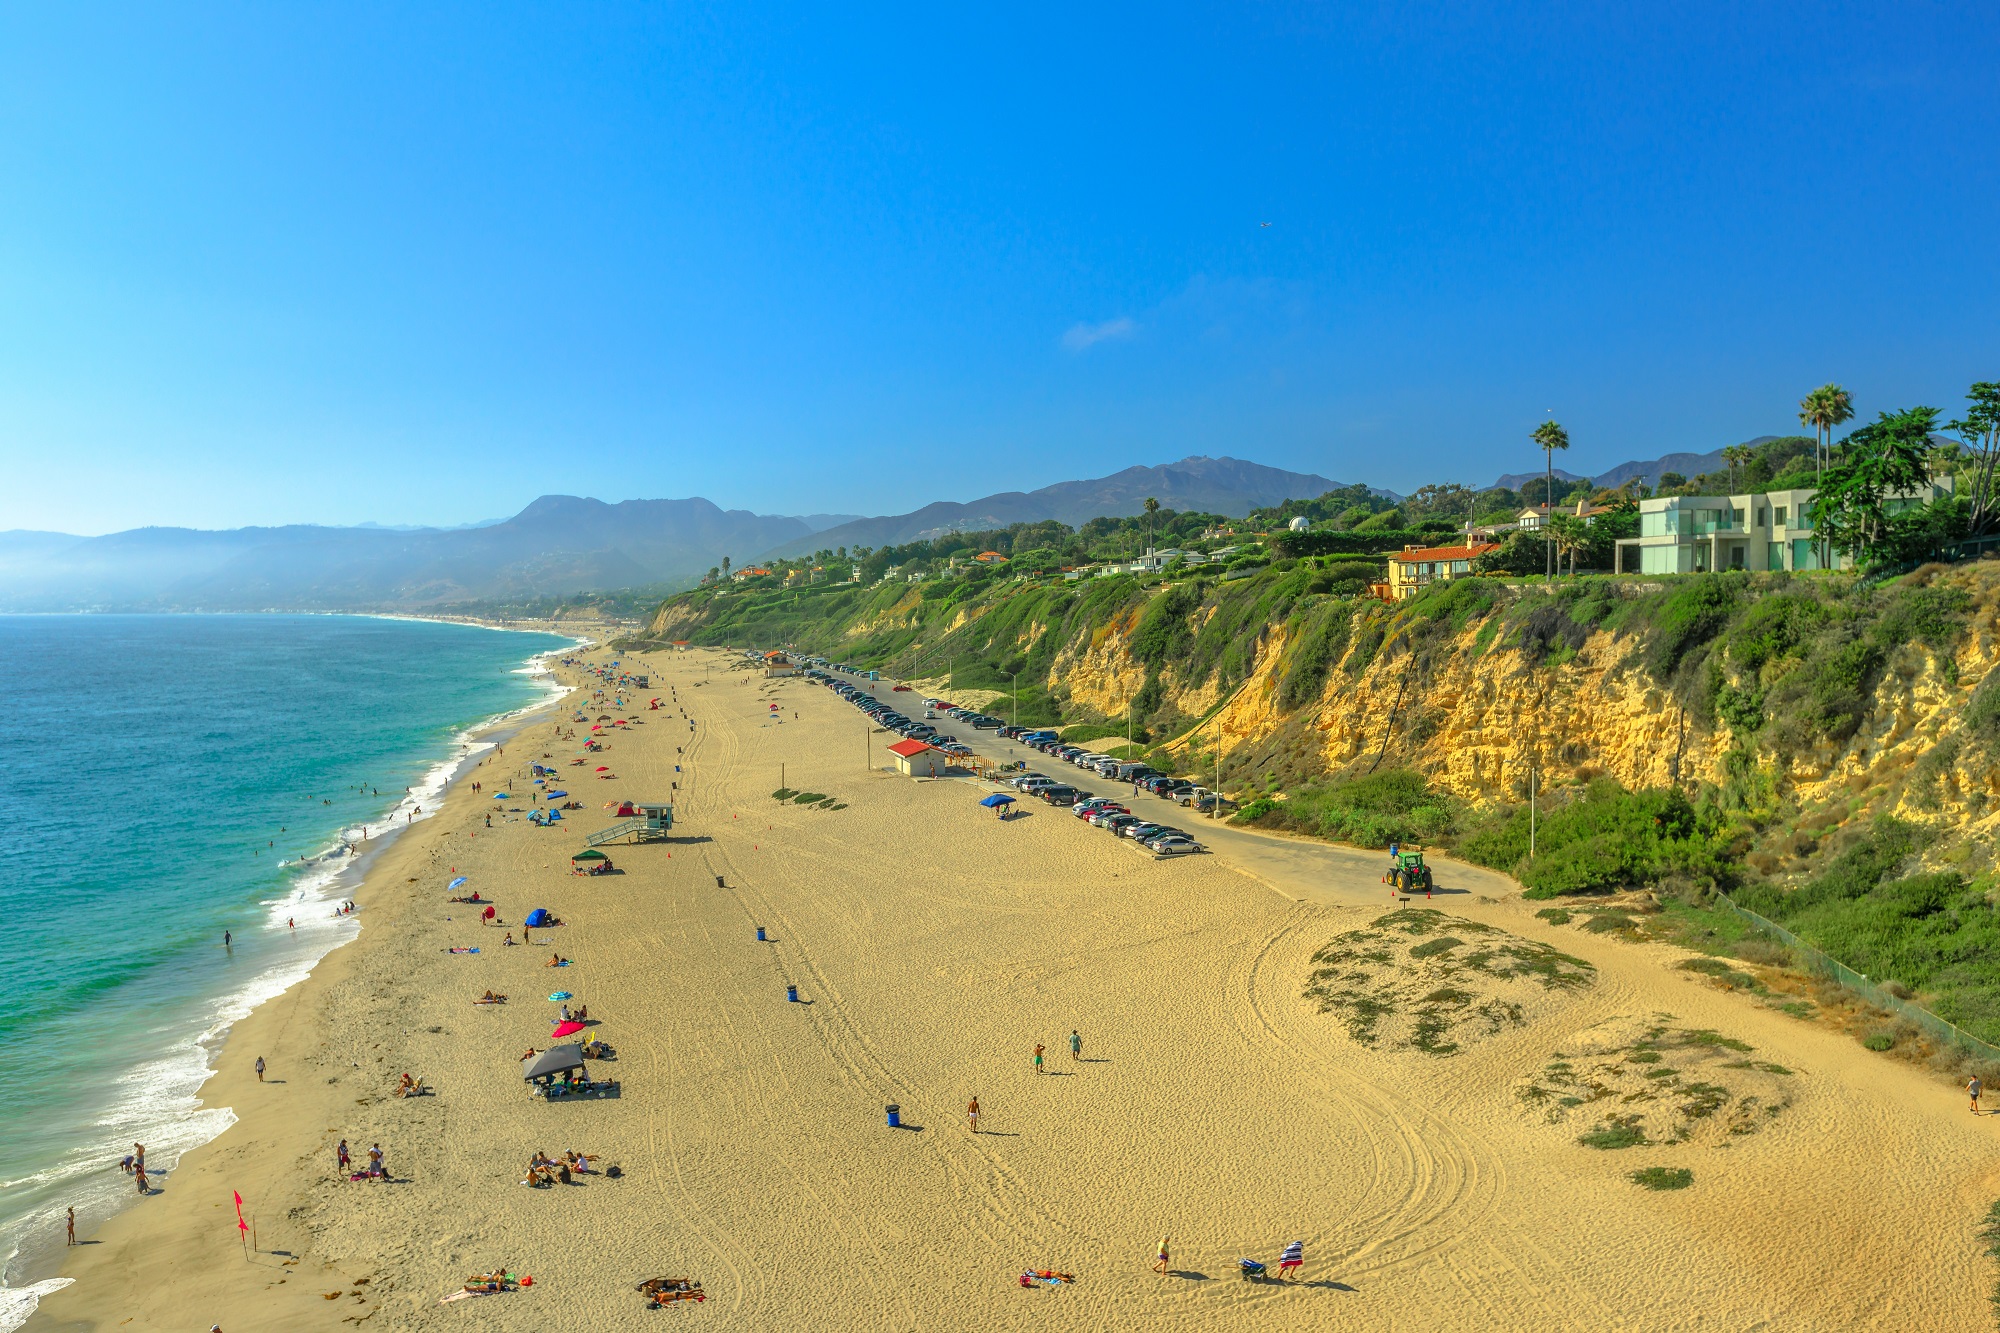 Malibu Attractions: 7 Fun Things to Do While Visiting SoCal